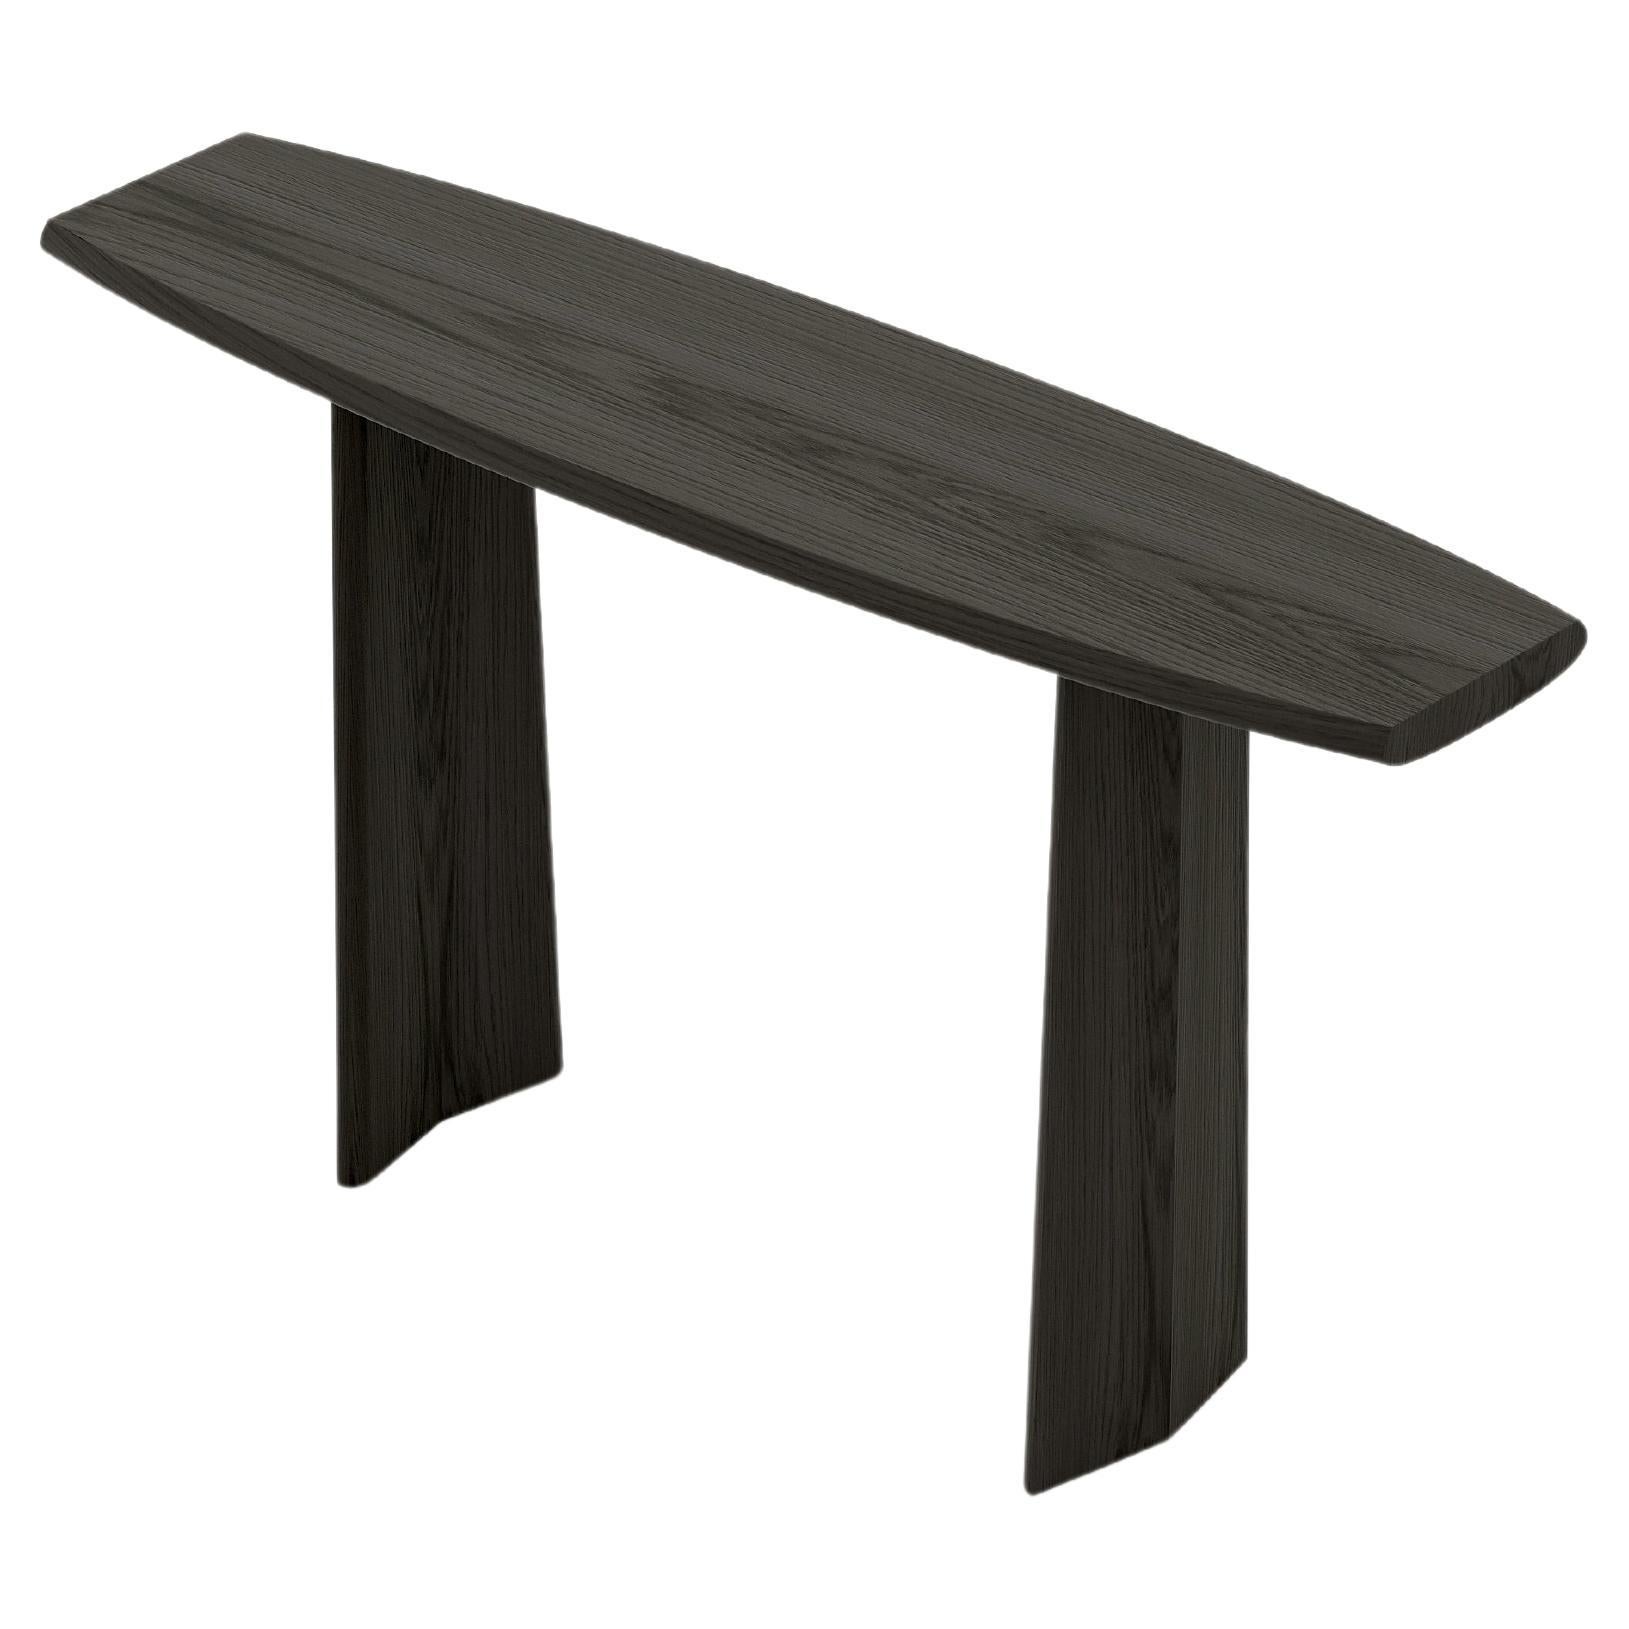 Peana Console Table in Black Tinted Wood Finish, Sideboard by Joel Escalona im Angebot